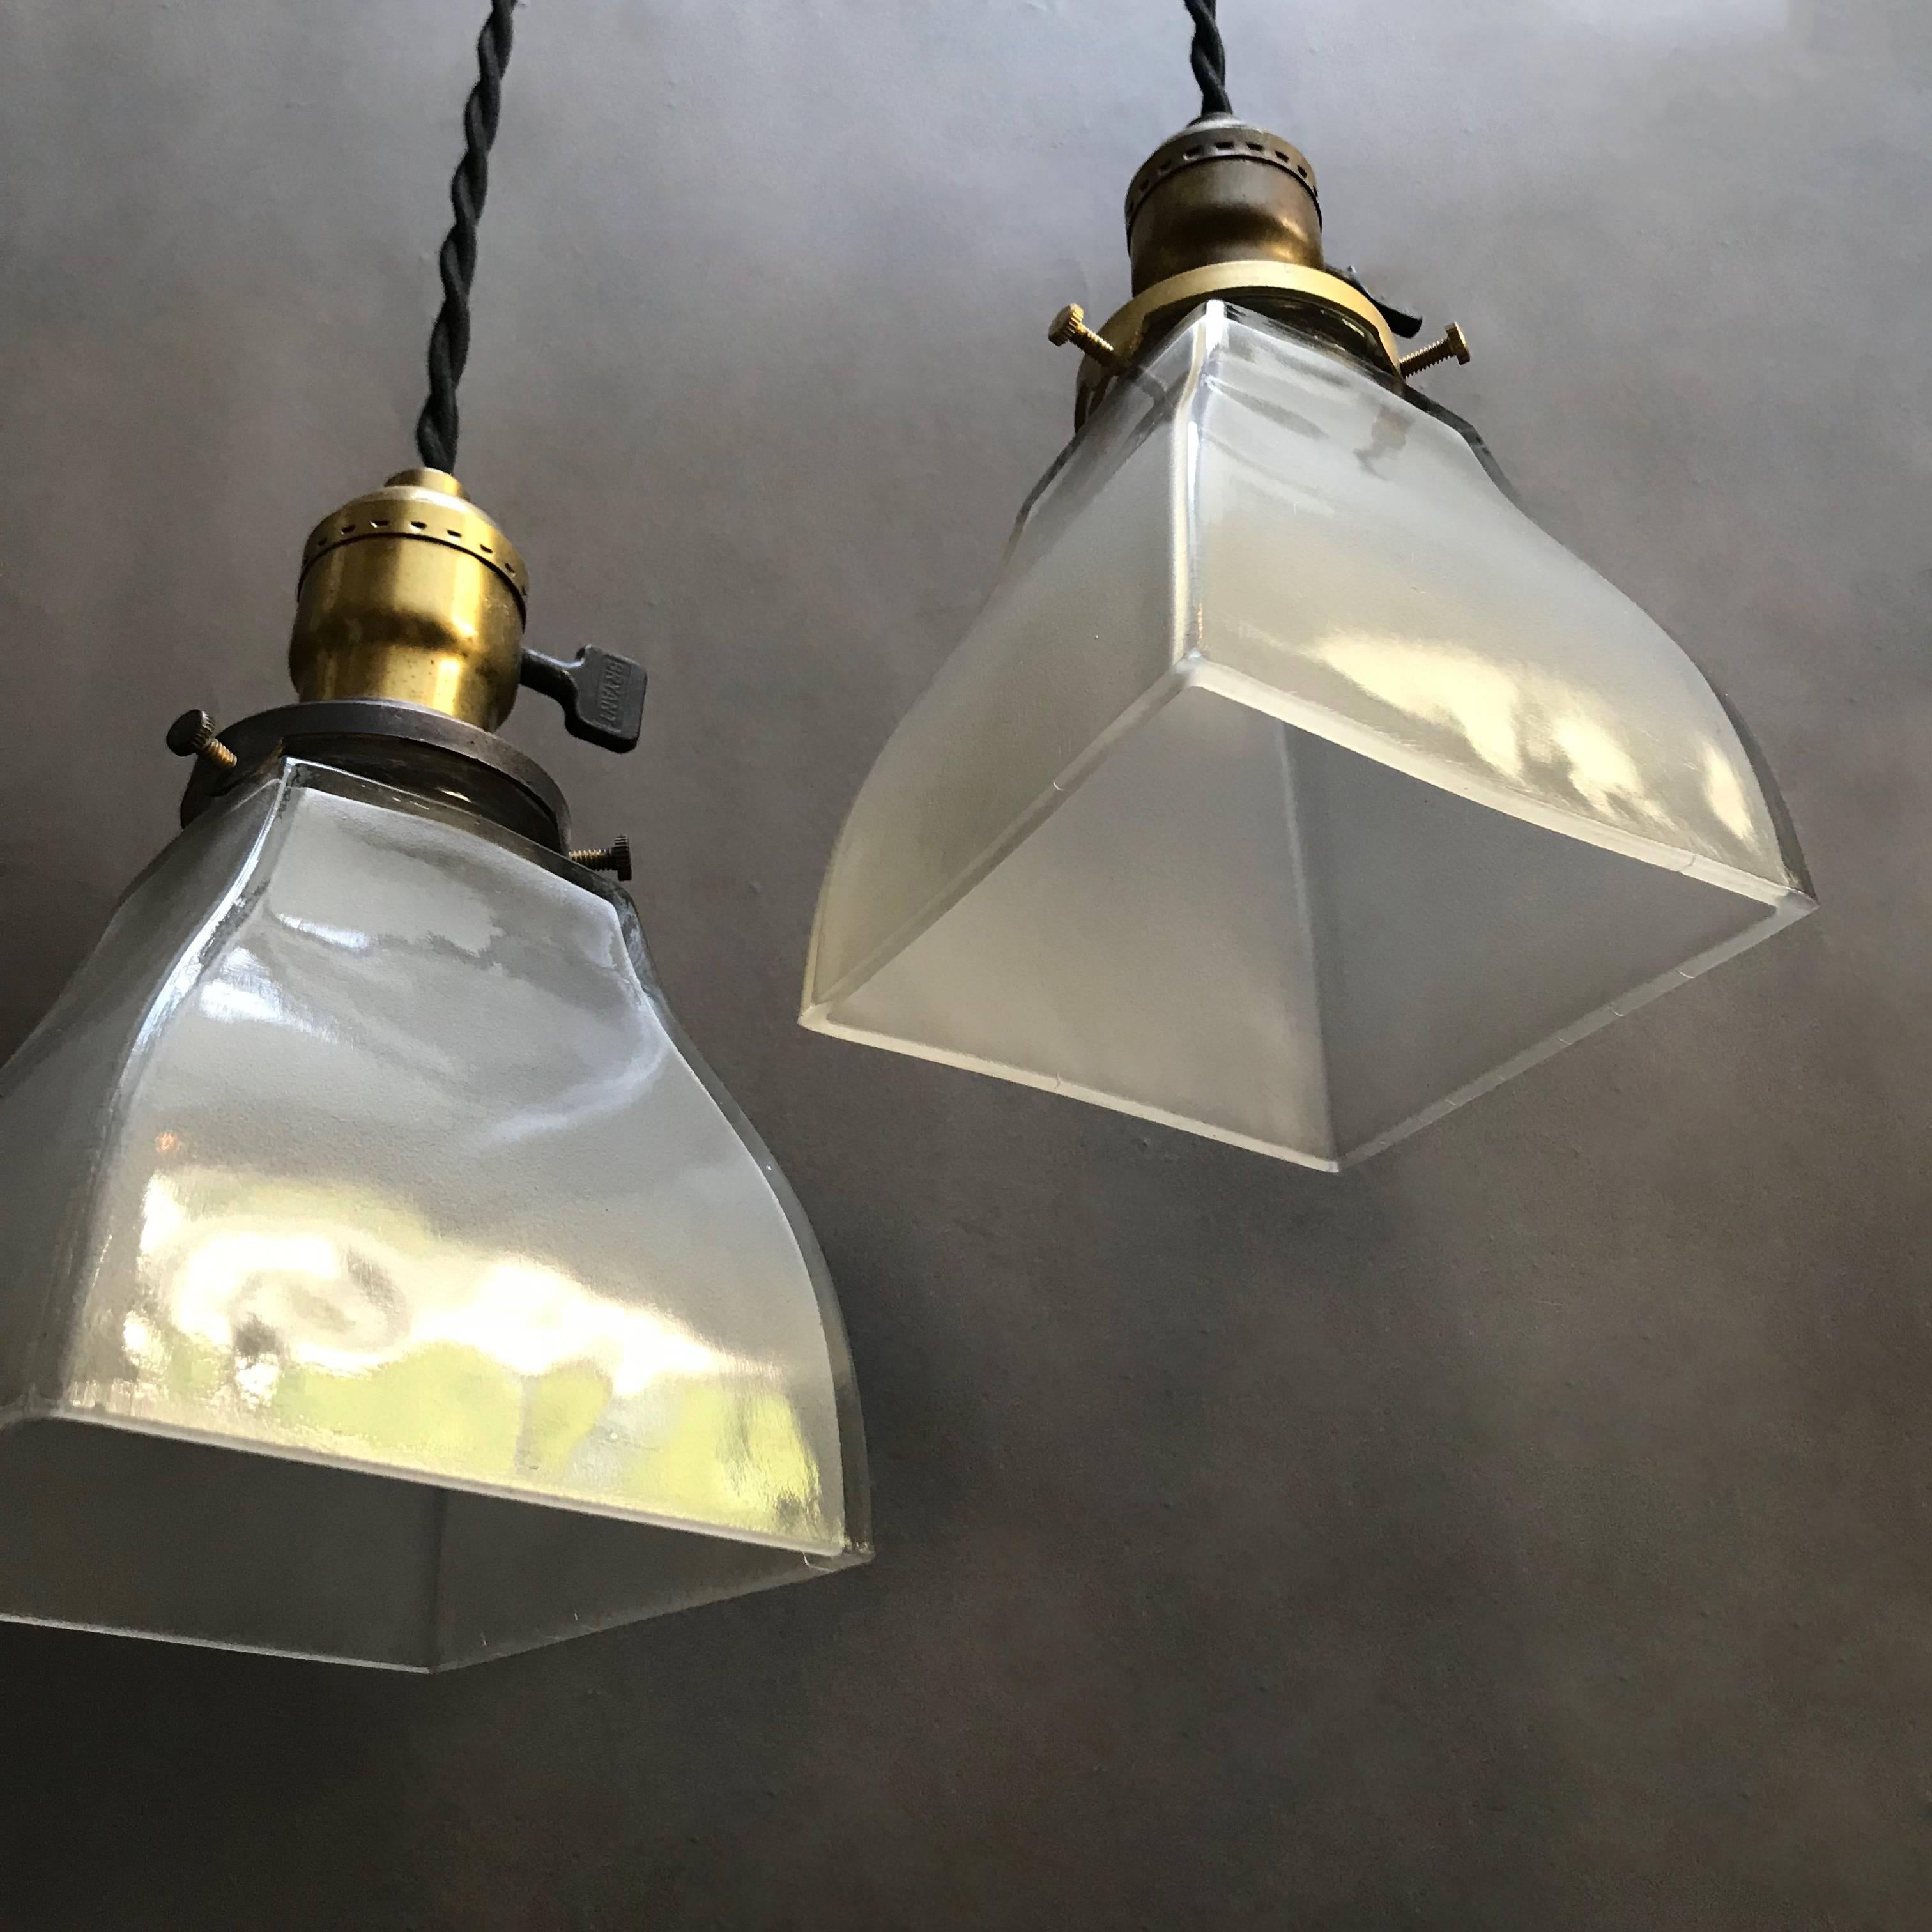 20th Century Pair of Industrial Frosted Glass and Brass Pendant Lights For Sale